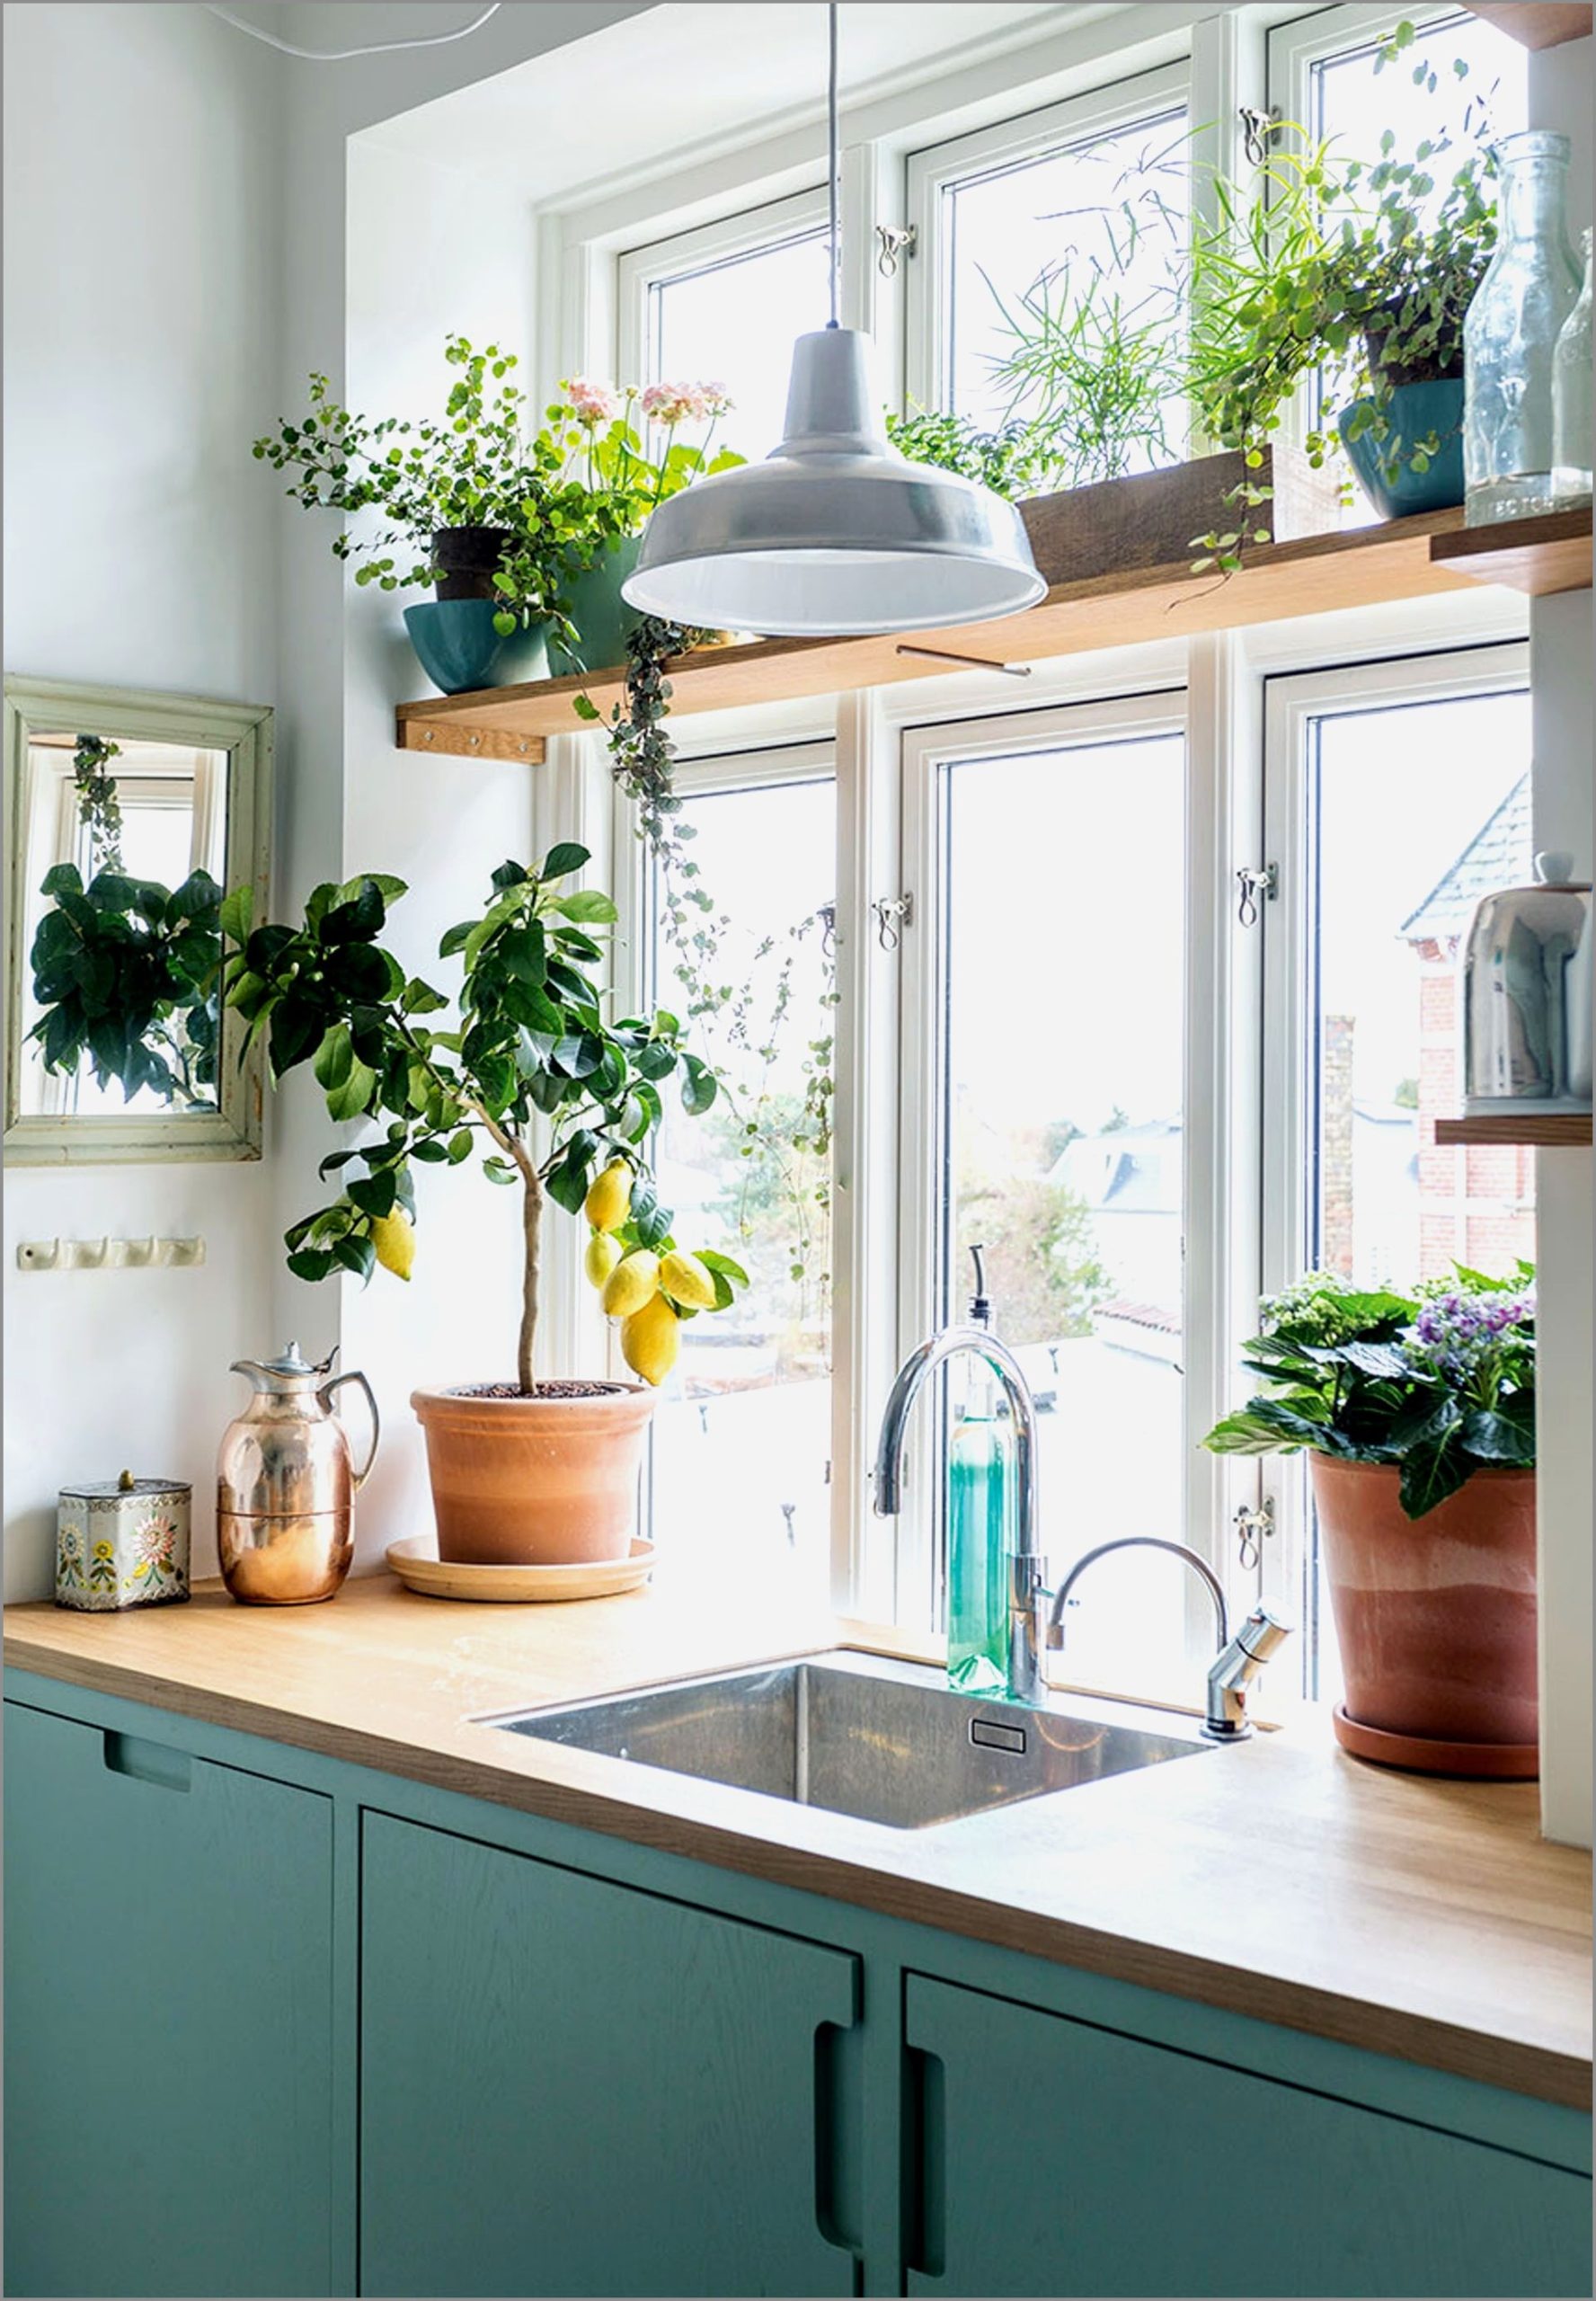 Adding plants 2 scaled 80+ Unusual Kitchen Design Ideas for Small Spaces - 14